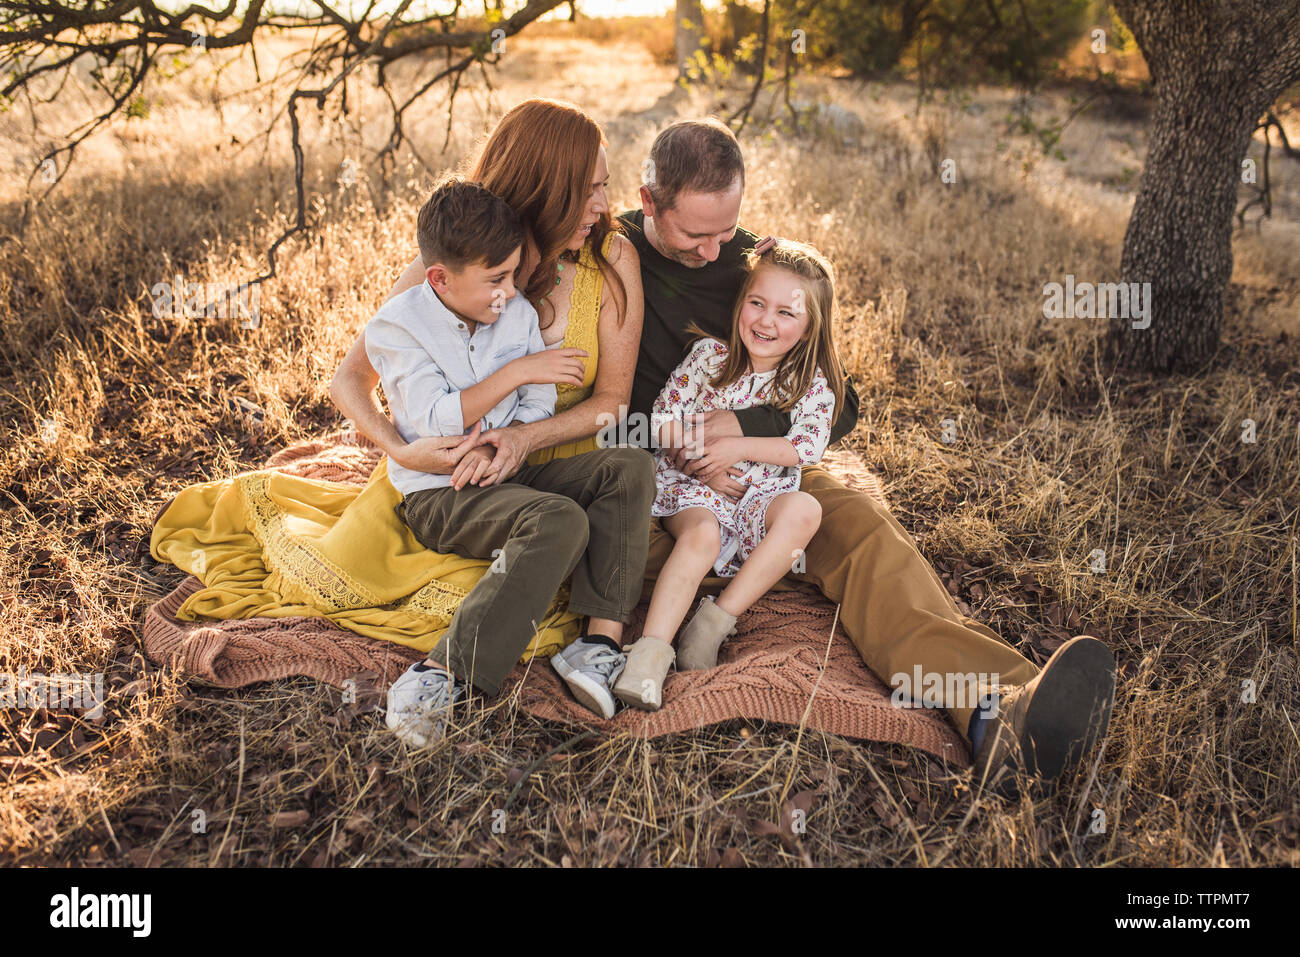 Girl embraced by father and laughing while sitting in California field Stock Photo